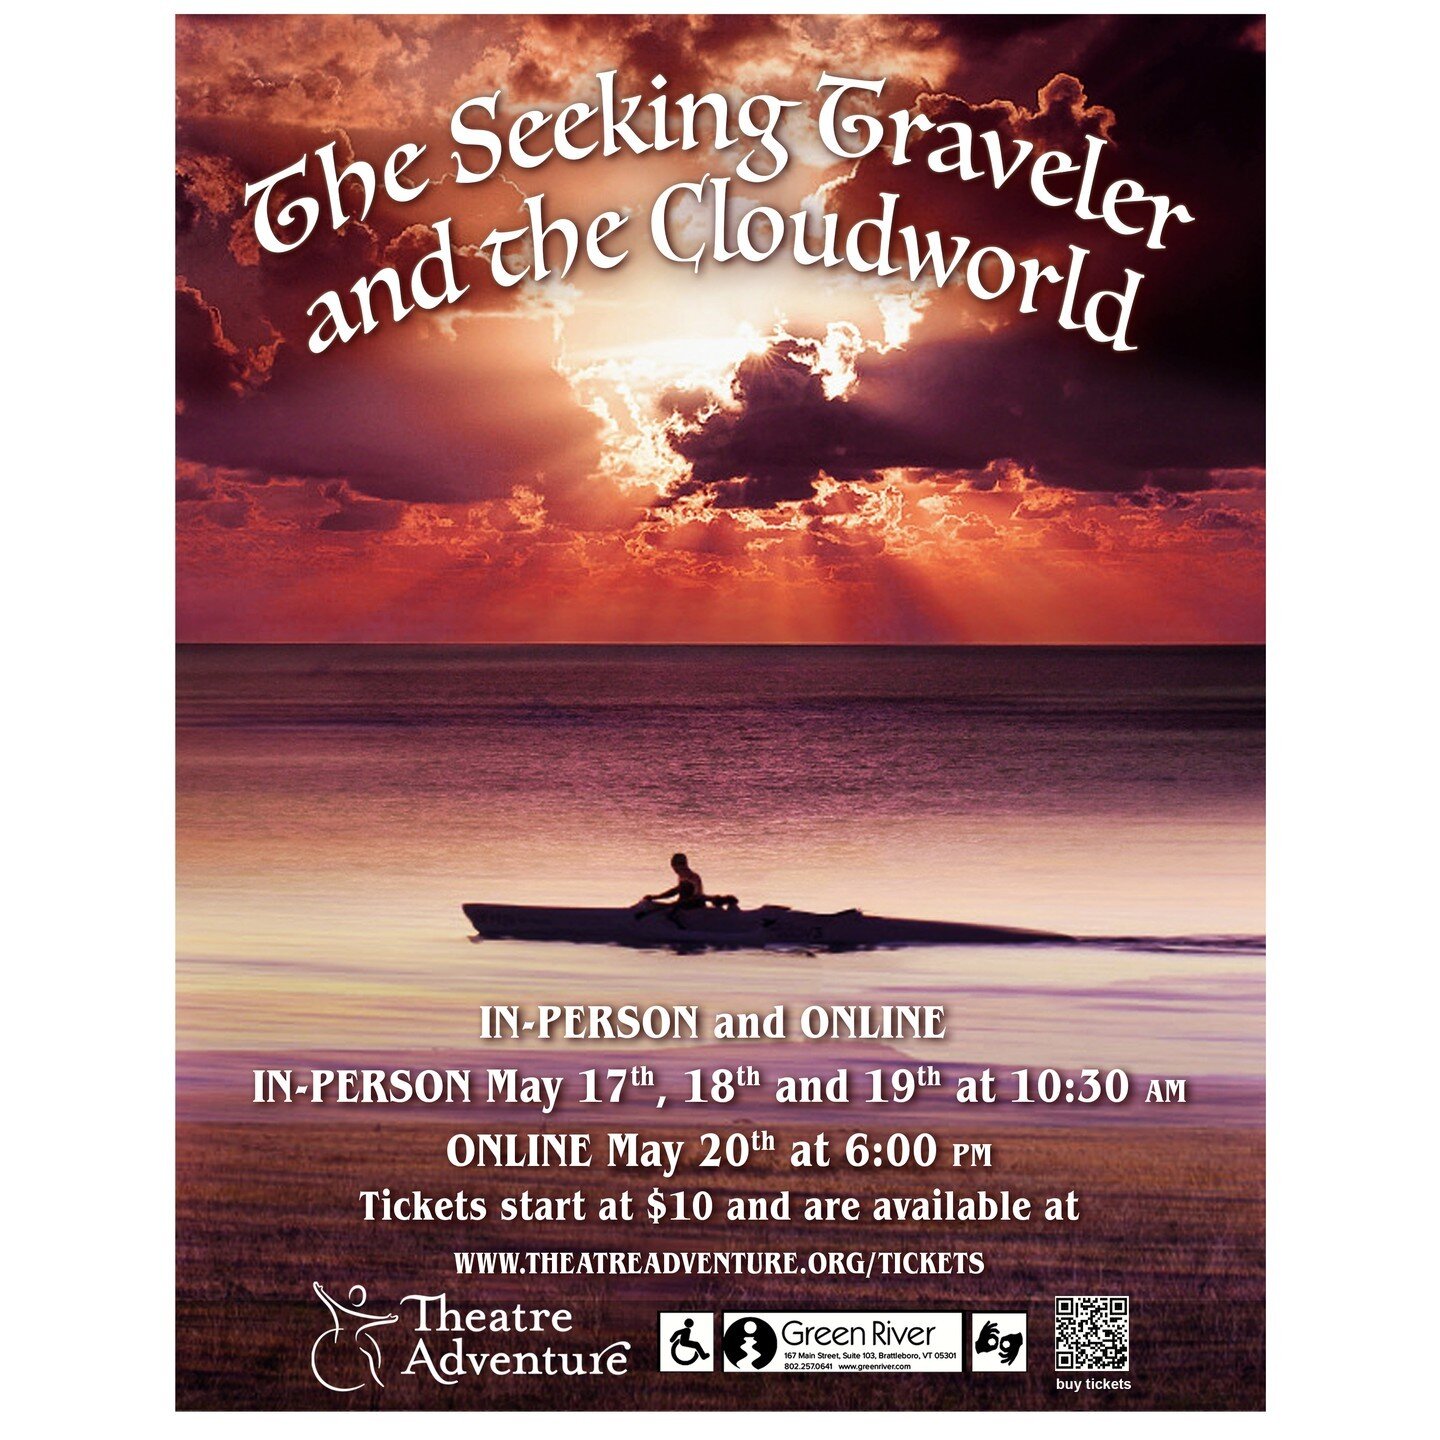 Tickets now available for the Wednesday Troupe Spring Show
&quot;The Seeking Traveler and the Cloudworld&quot;

IN-PERSON PERFORMANCES
Wednesday, May 17th at 10:30 Am ET
Thursday, May 18th at 10:30 am ET
Friday, May 19th at 10:30 am ET

ONLINE STREAM